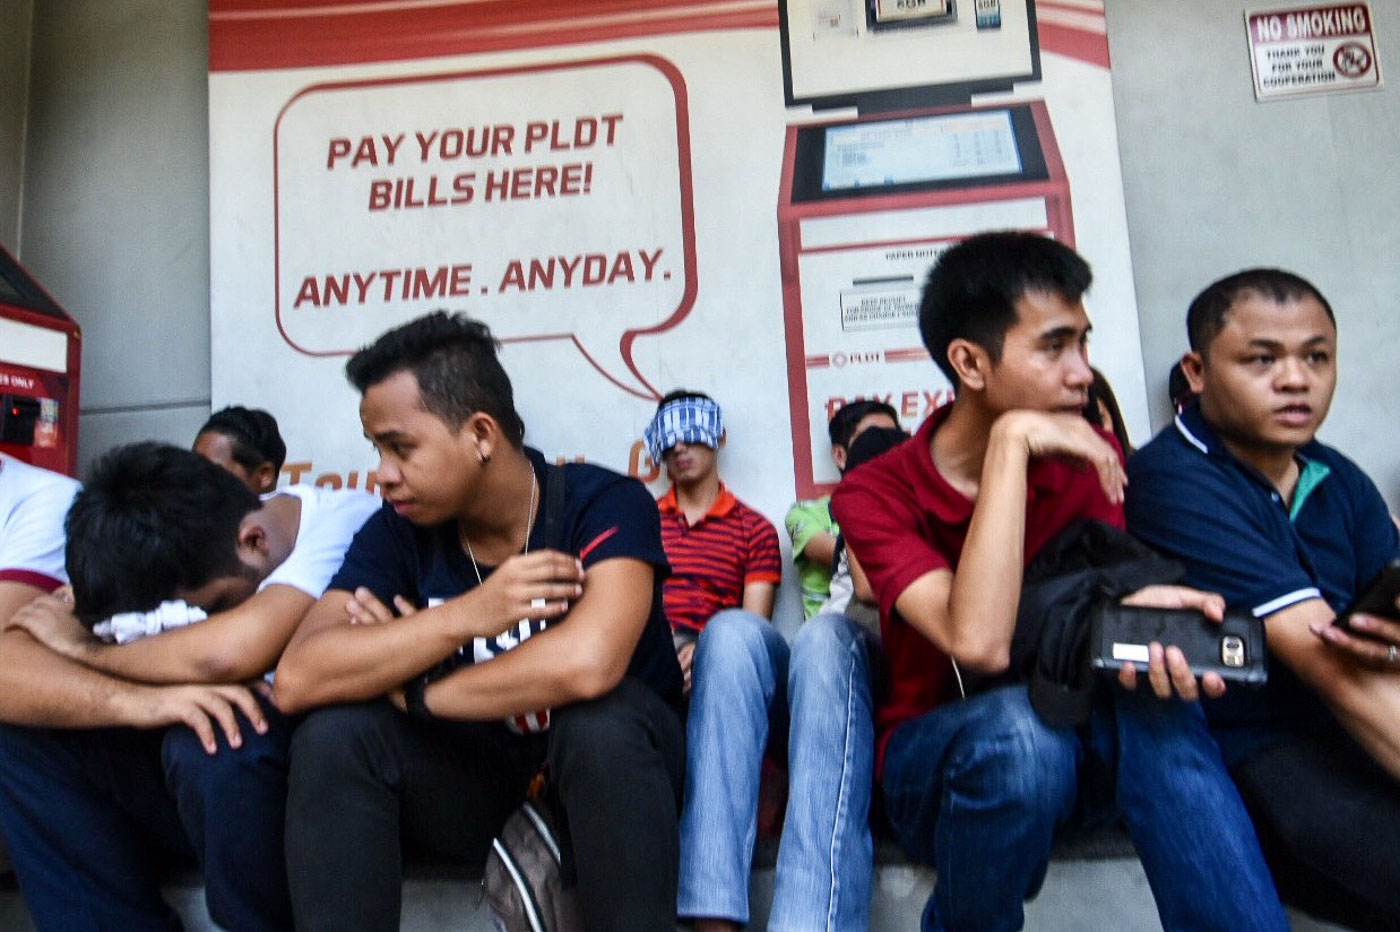 A LONG WAIT. Contractual employees wait outside the PLDT Human Resources Department in Mandaluyong City on June 1, 2018 for the outcome of a dialogue between union leaders and the management on the status of their regularization. Photo by Angie de Silva/Rappler  